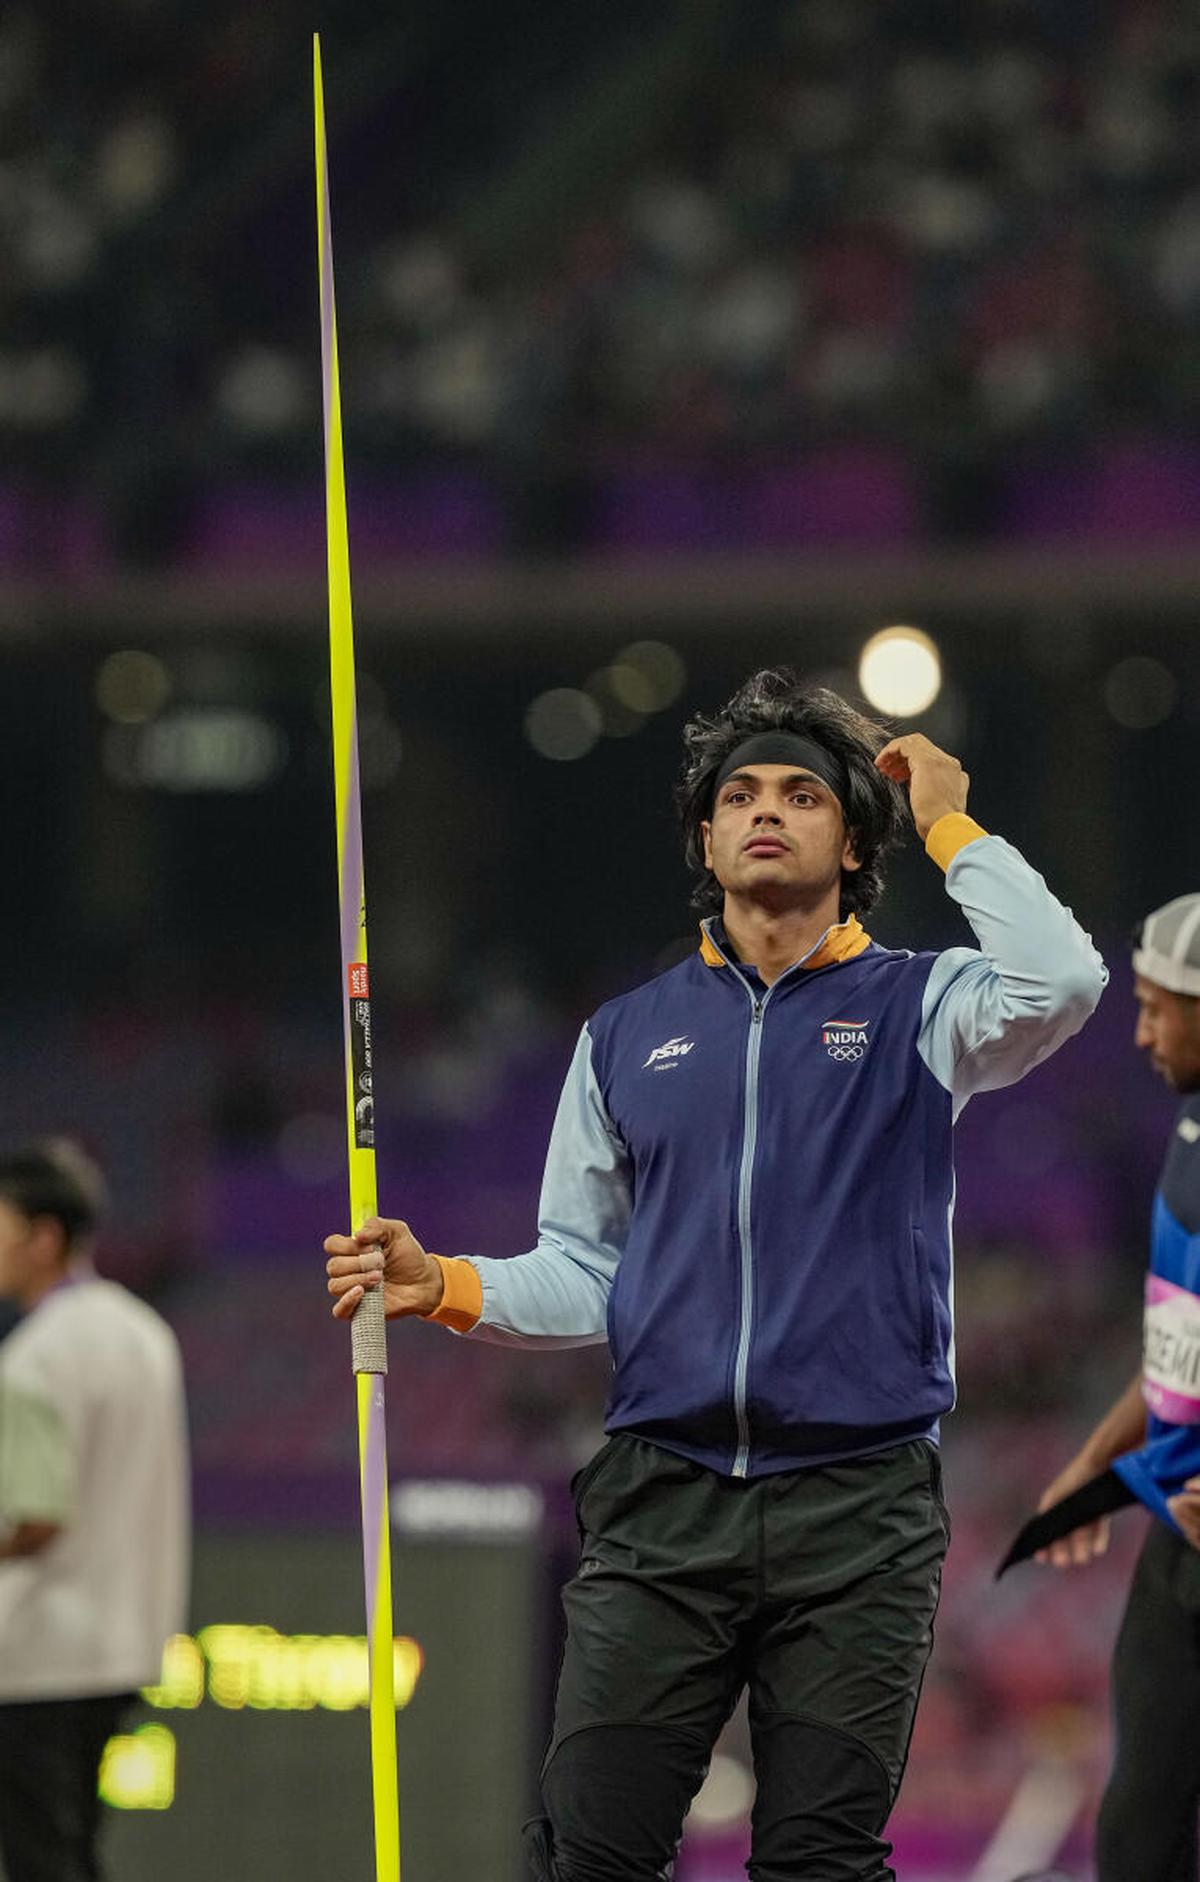 Why did Neeraj Chopra get seven throws instead of six in the Asian Games javelin final?